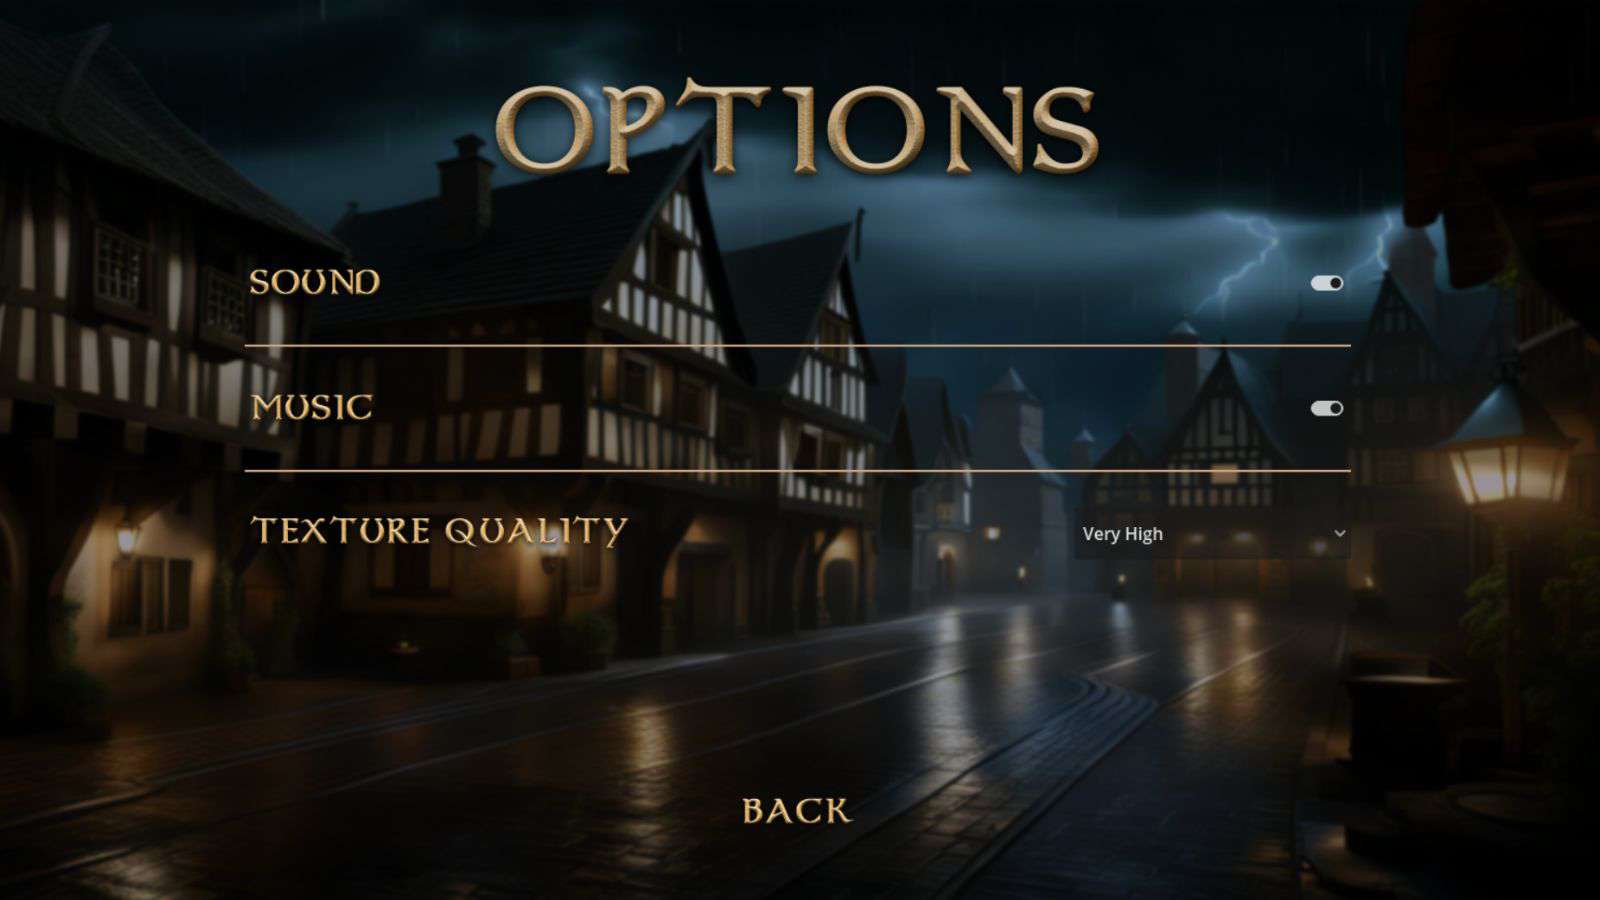 The 'Options' user interface menu scene of the example 'Medieval Times' game created in the Godot 4 engine